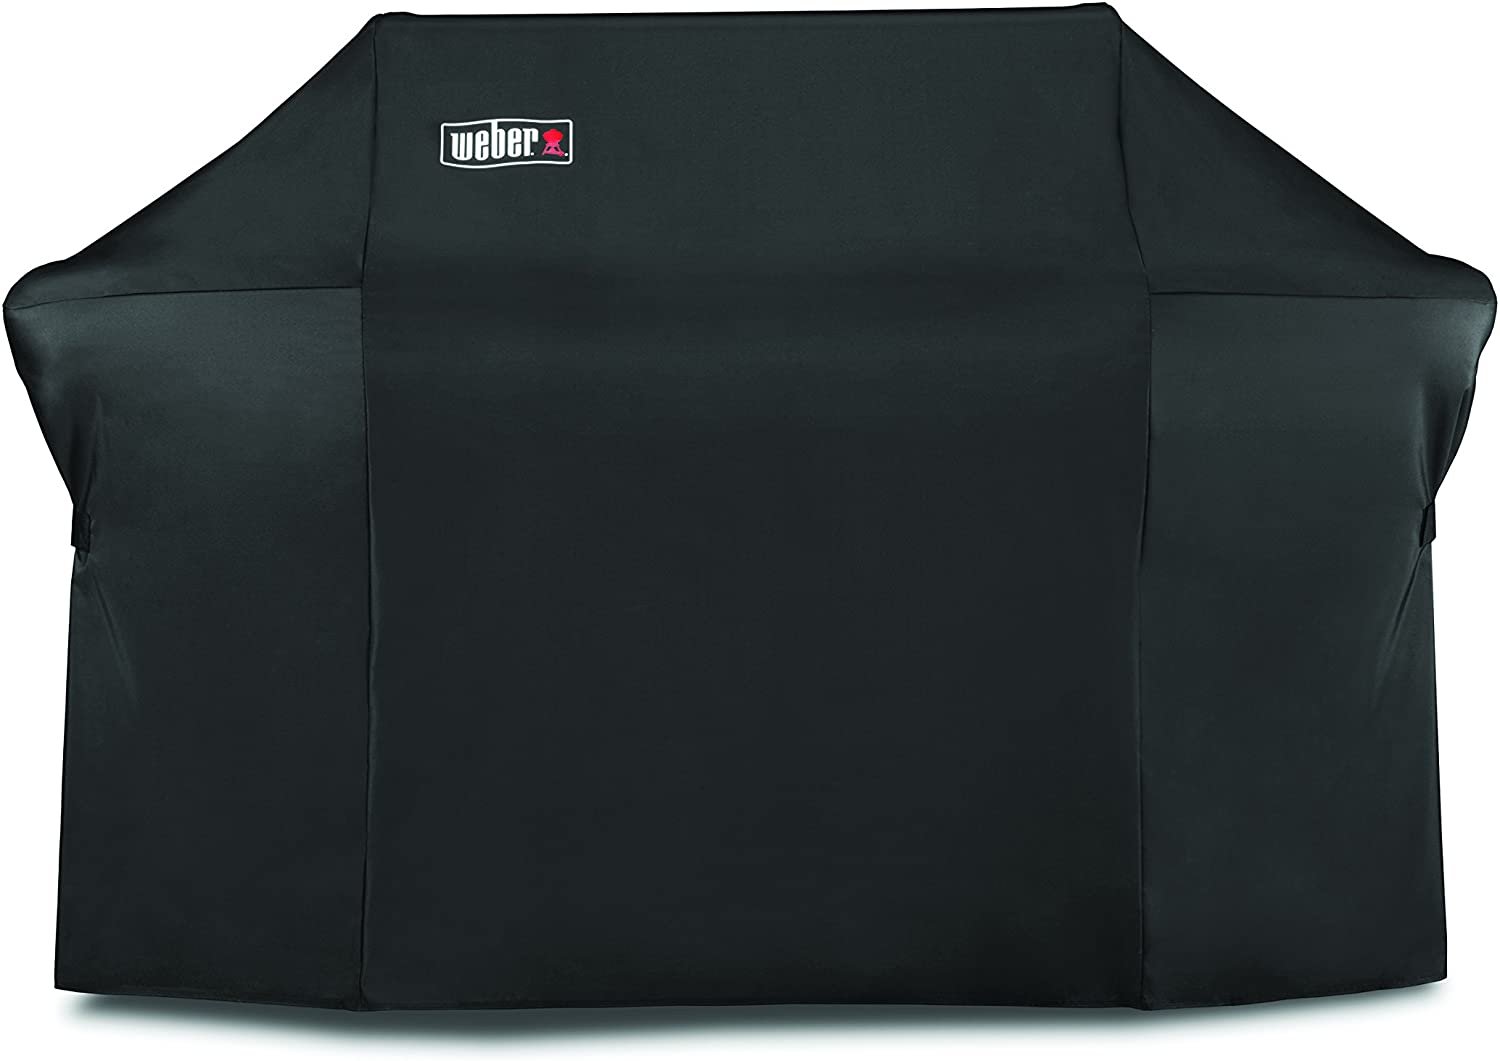 Weber 7109 Grill Cover with Storage Bag for Summit 600-Series Gas Grills,Black - image 1 of 4